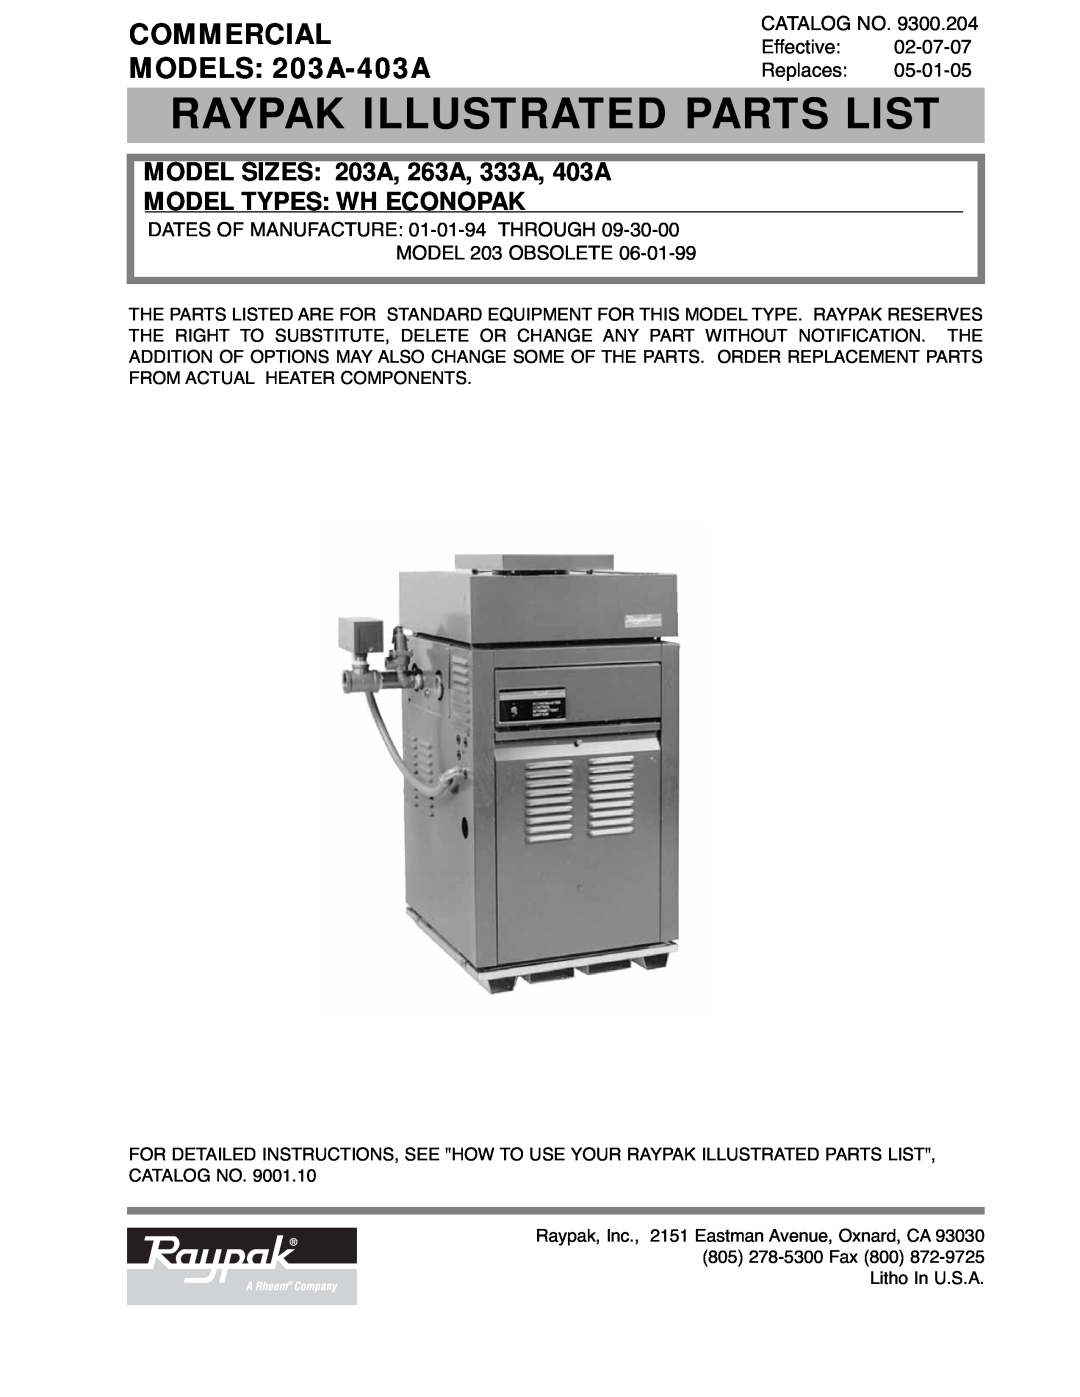 Raypak manual Raypak Illustrated Parts List, COMMERCIAL MODELS 203A-403A, MODEL SIZES 203A, 263A, 333A, 403A 